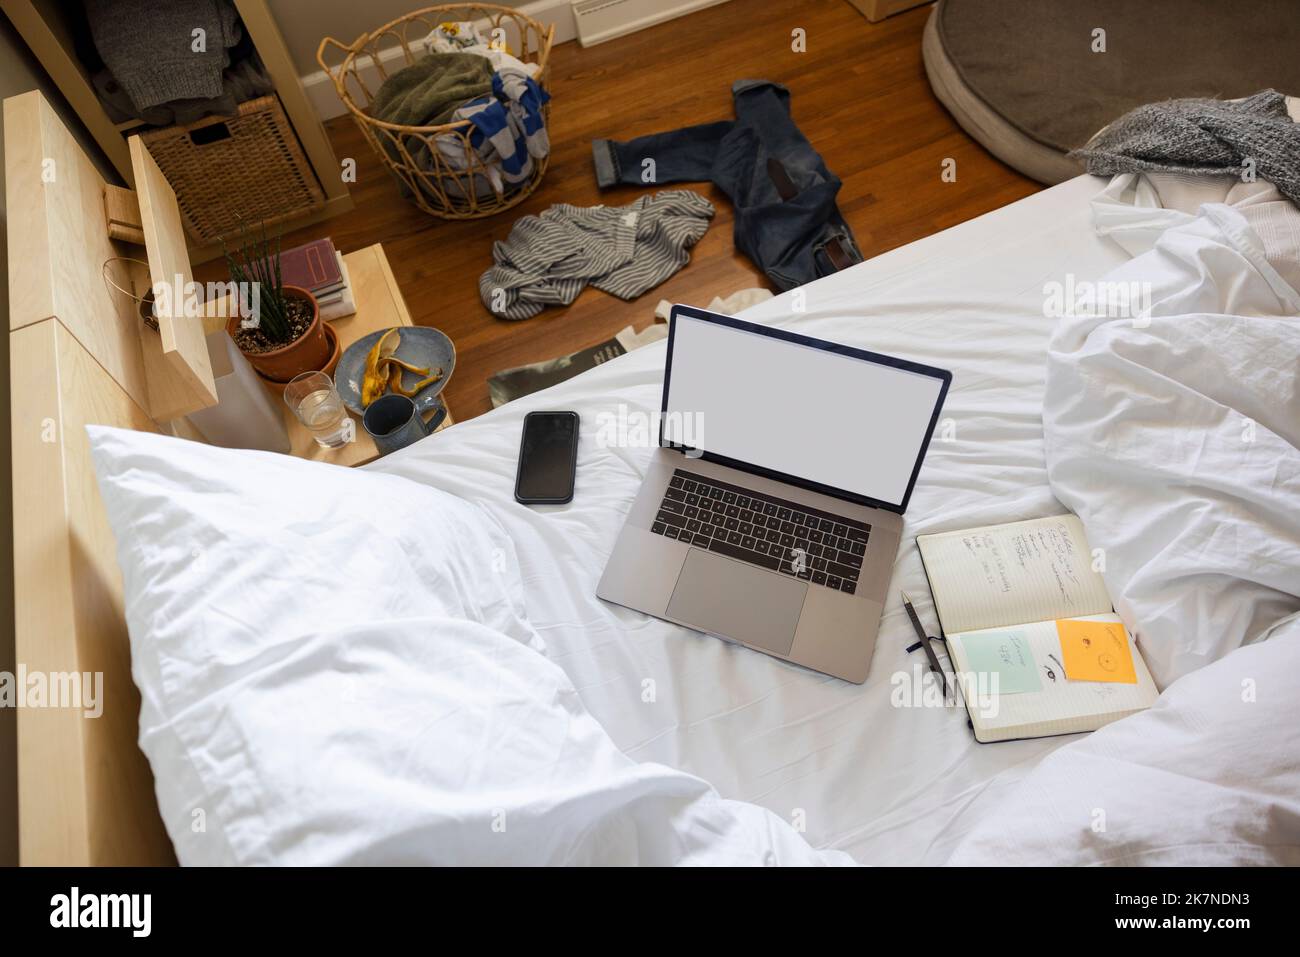 Work from home laptop and notebook on unmade bed Stock Photo